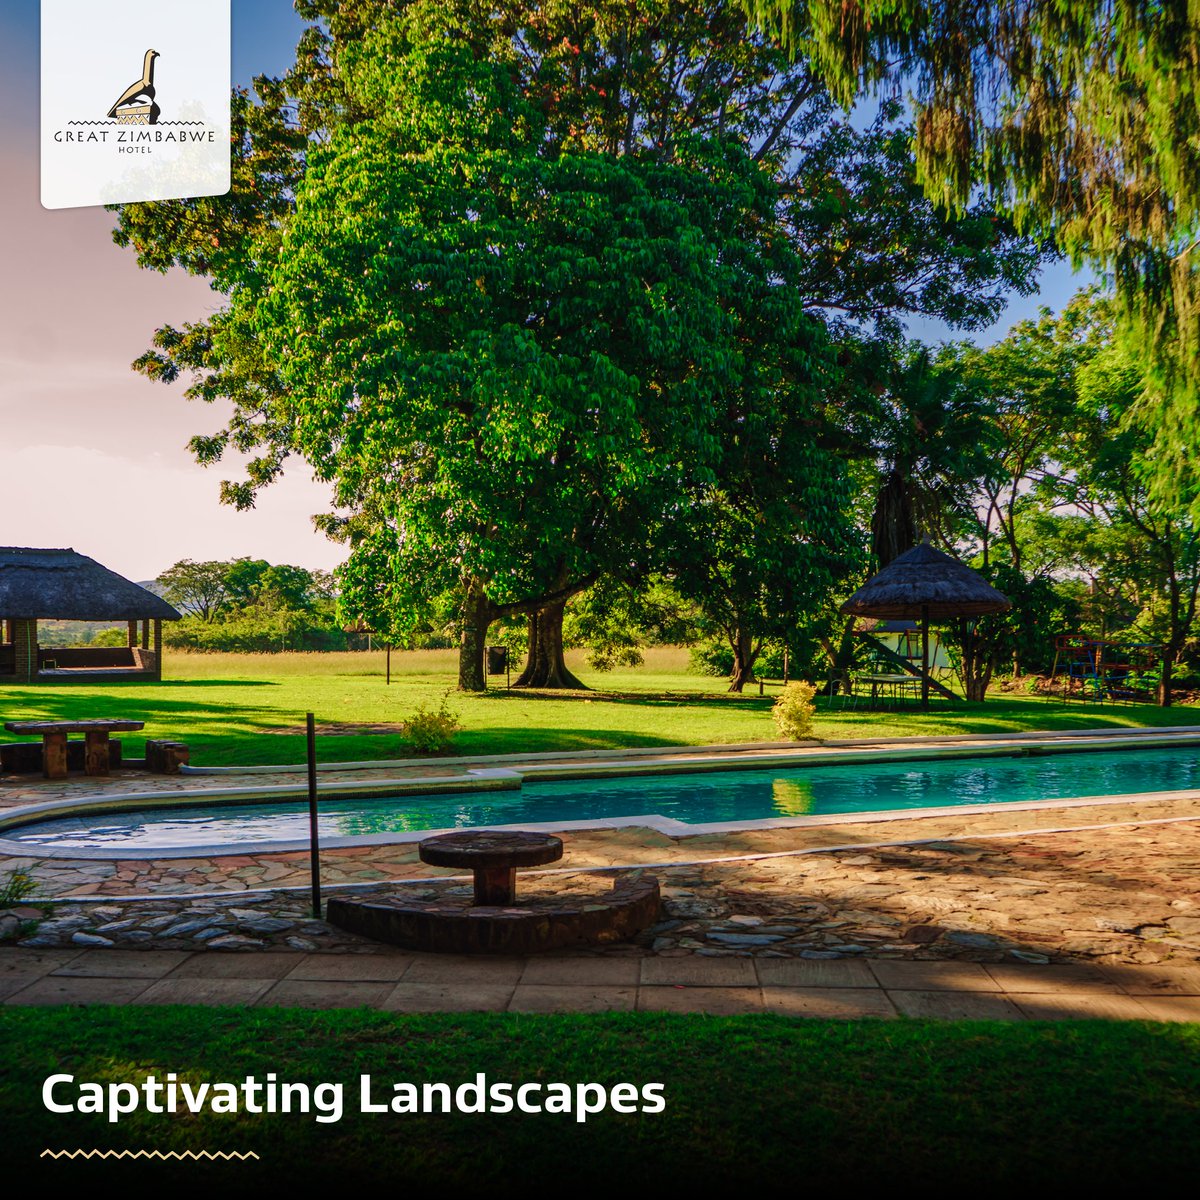 Enjoy the unforgettable  as the spirit of adventure guides you through captivating landscapes.​

Book on: reservations@gzim.africansun.co.zw to make a reservation.​

 #Landscapes #Views #Masvingo #ZimTravel #GreatZimbabweHotel #ProudlyAfricanSun #ExperienceExploreEnjoy